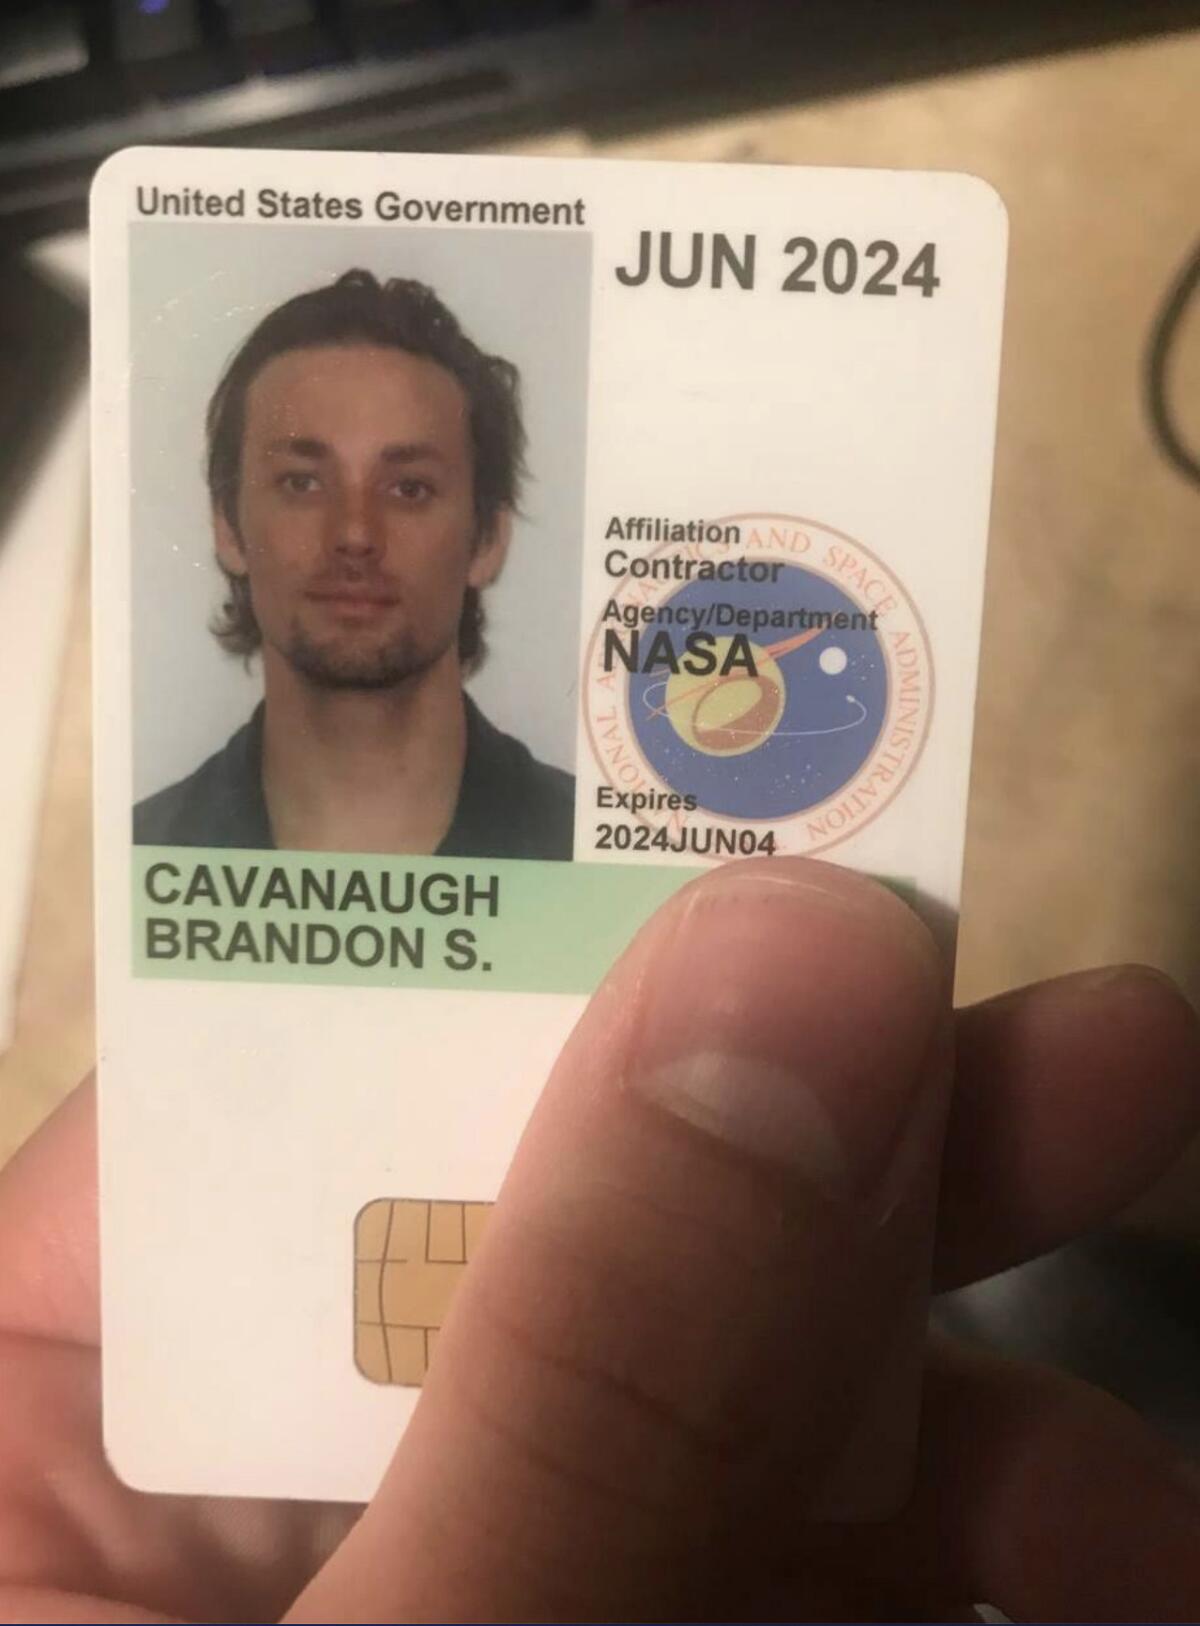 Brandon Cavanaugh of Huntington Beach allegedly posted his work ID in a Telegram chat where he went by "Brandon HB Groyper."